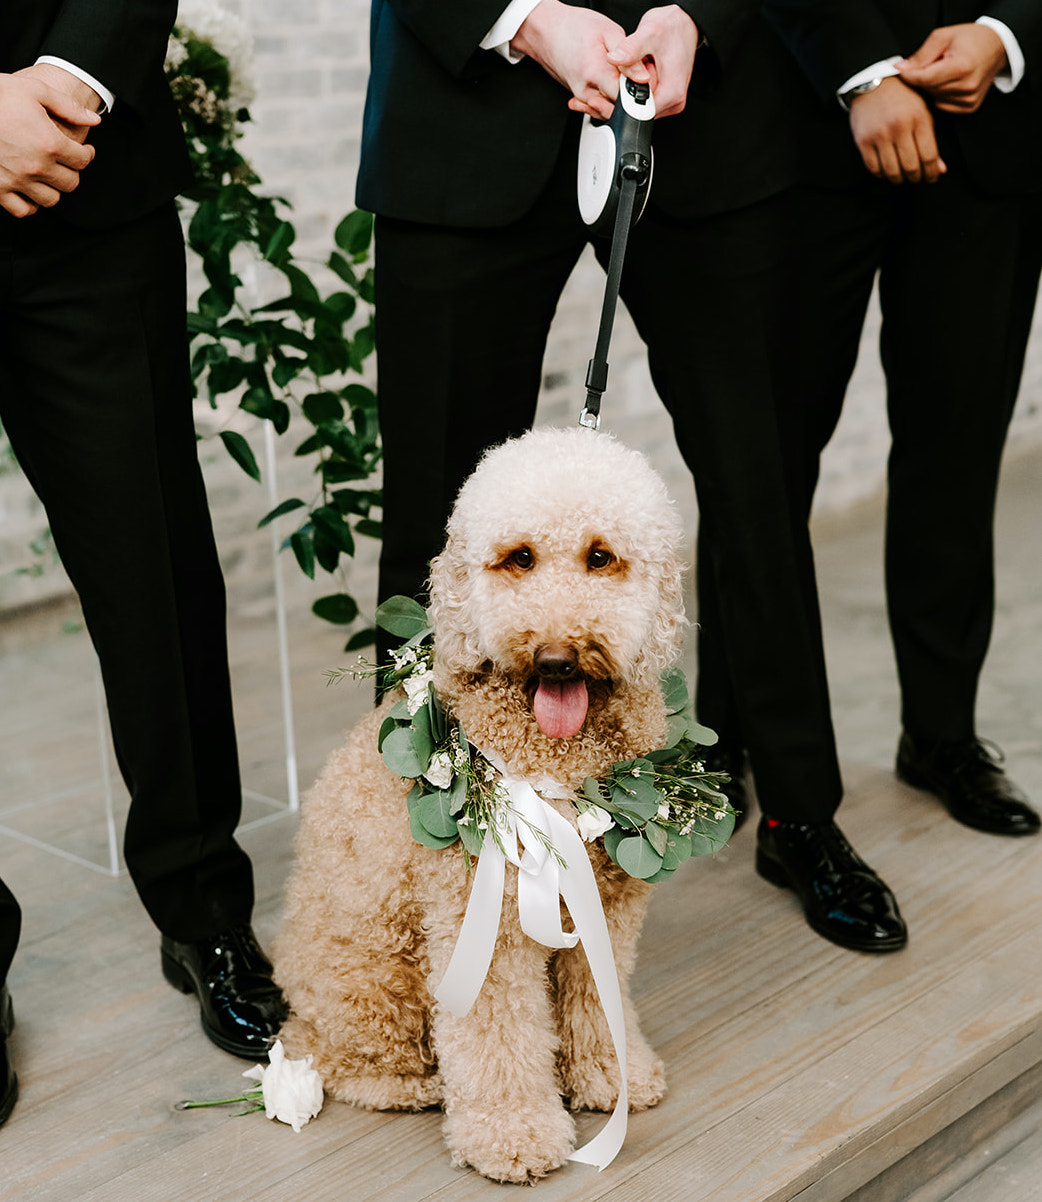 One of the groomsmen holds the leash to the bride and groom's dog, who is wearing a greenery garland around his neck.